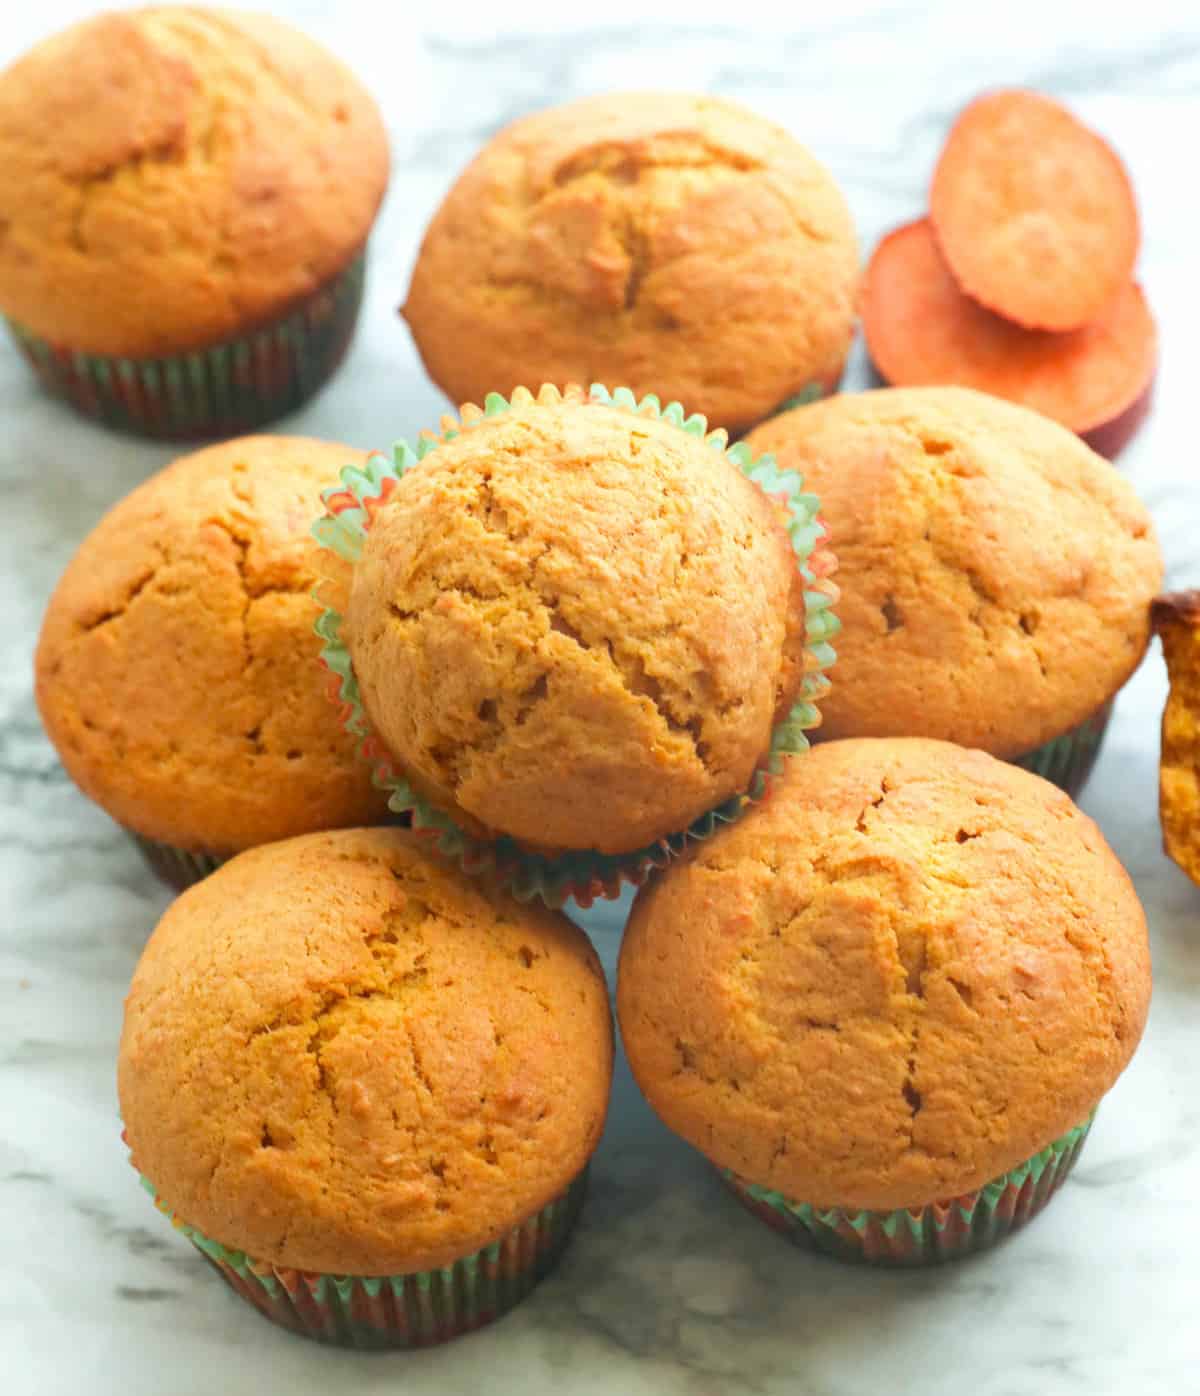 Freshly baked sweet potato muffin without streusel